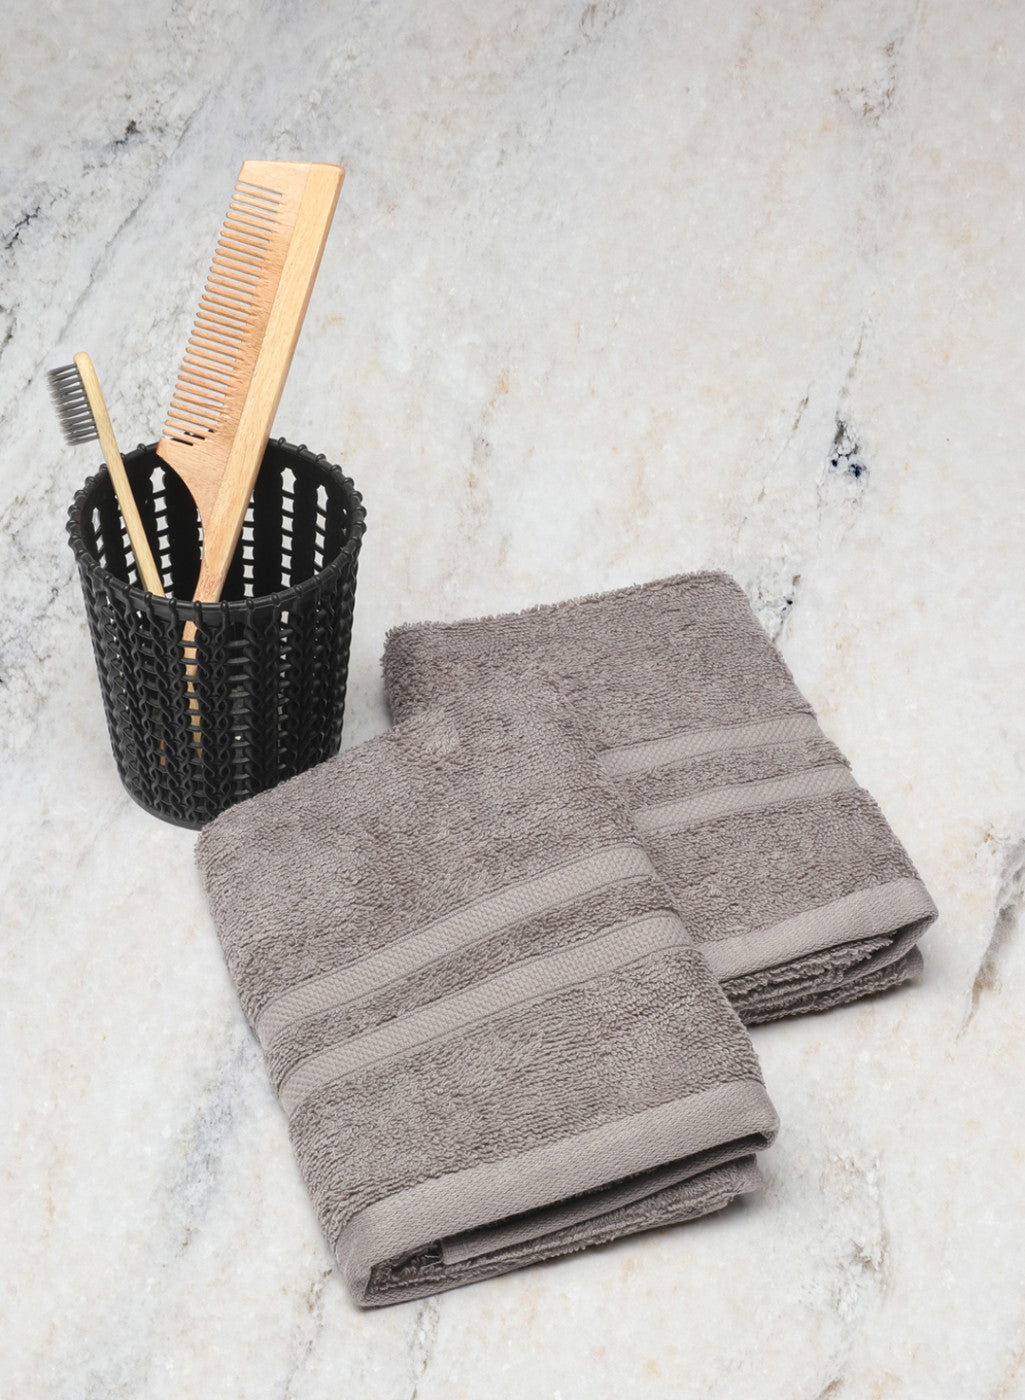 Grey Cotton 525 GSM Hand Towels (Pack of 2)